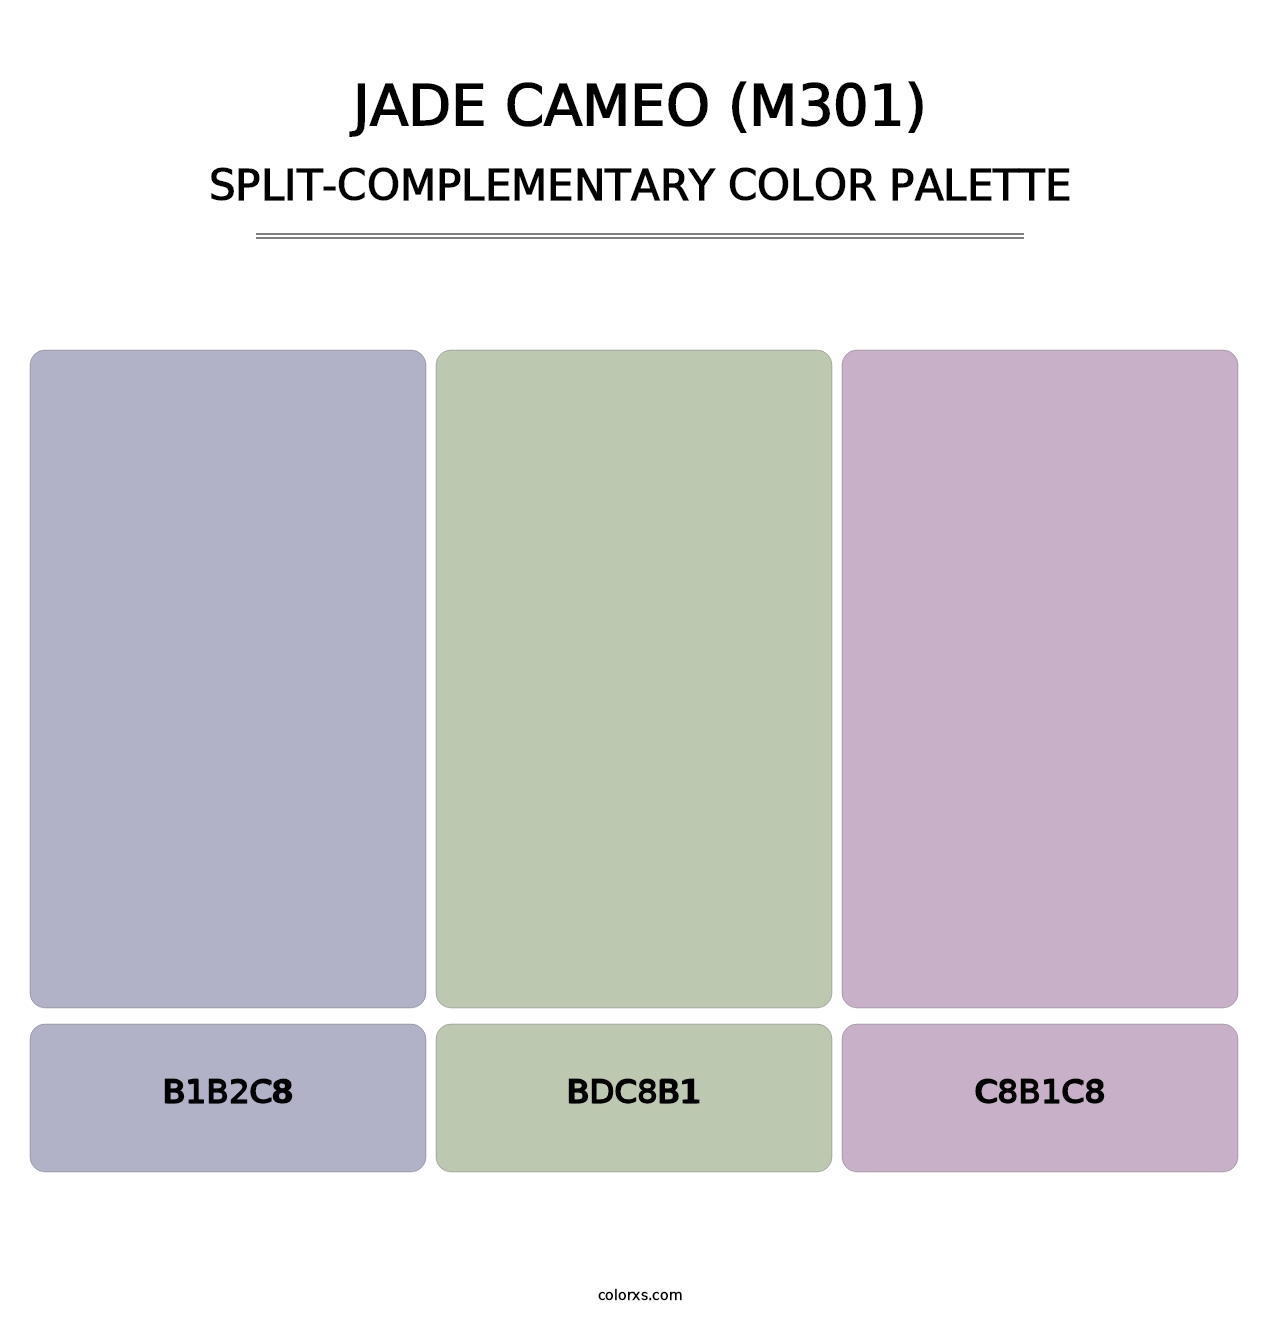 Jade Cameo (M301) - Split-Complementary Color Palette